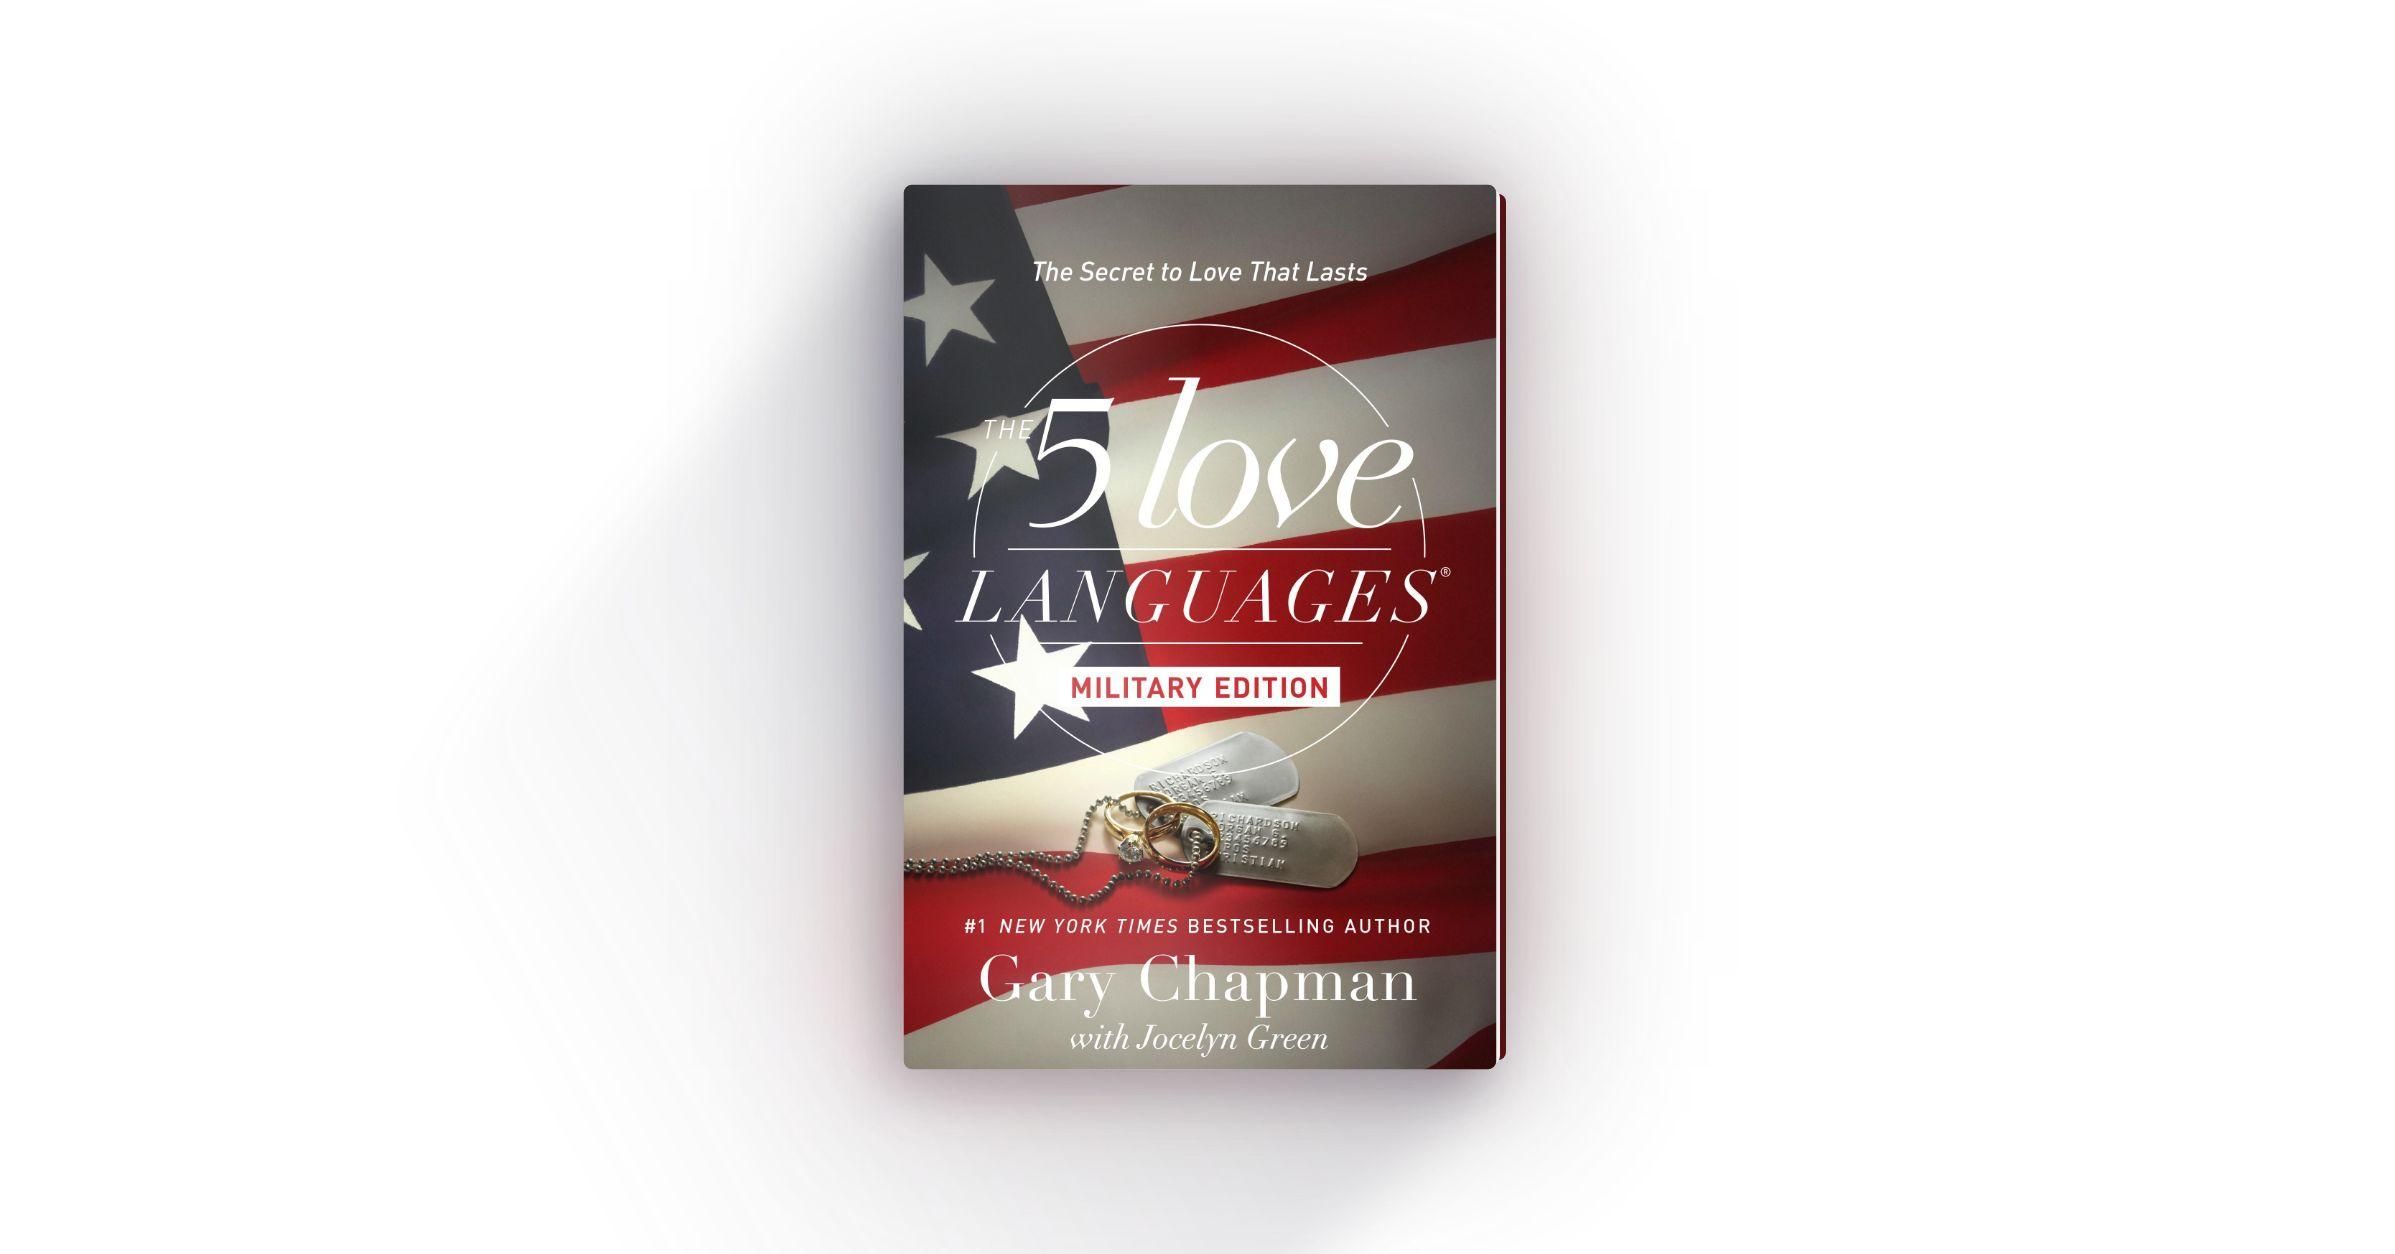 The 5 Love Languages® Military Edition